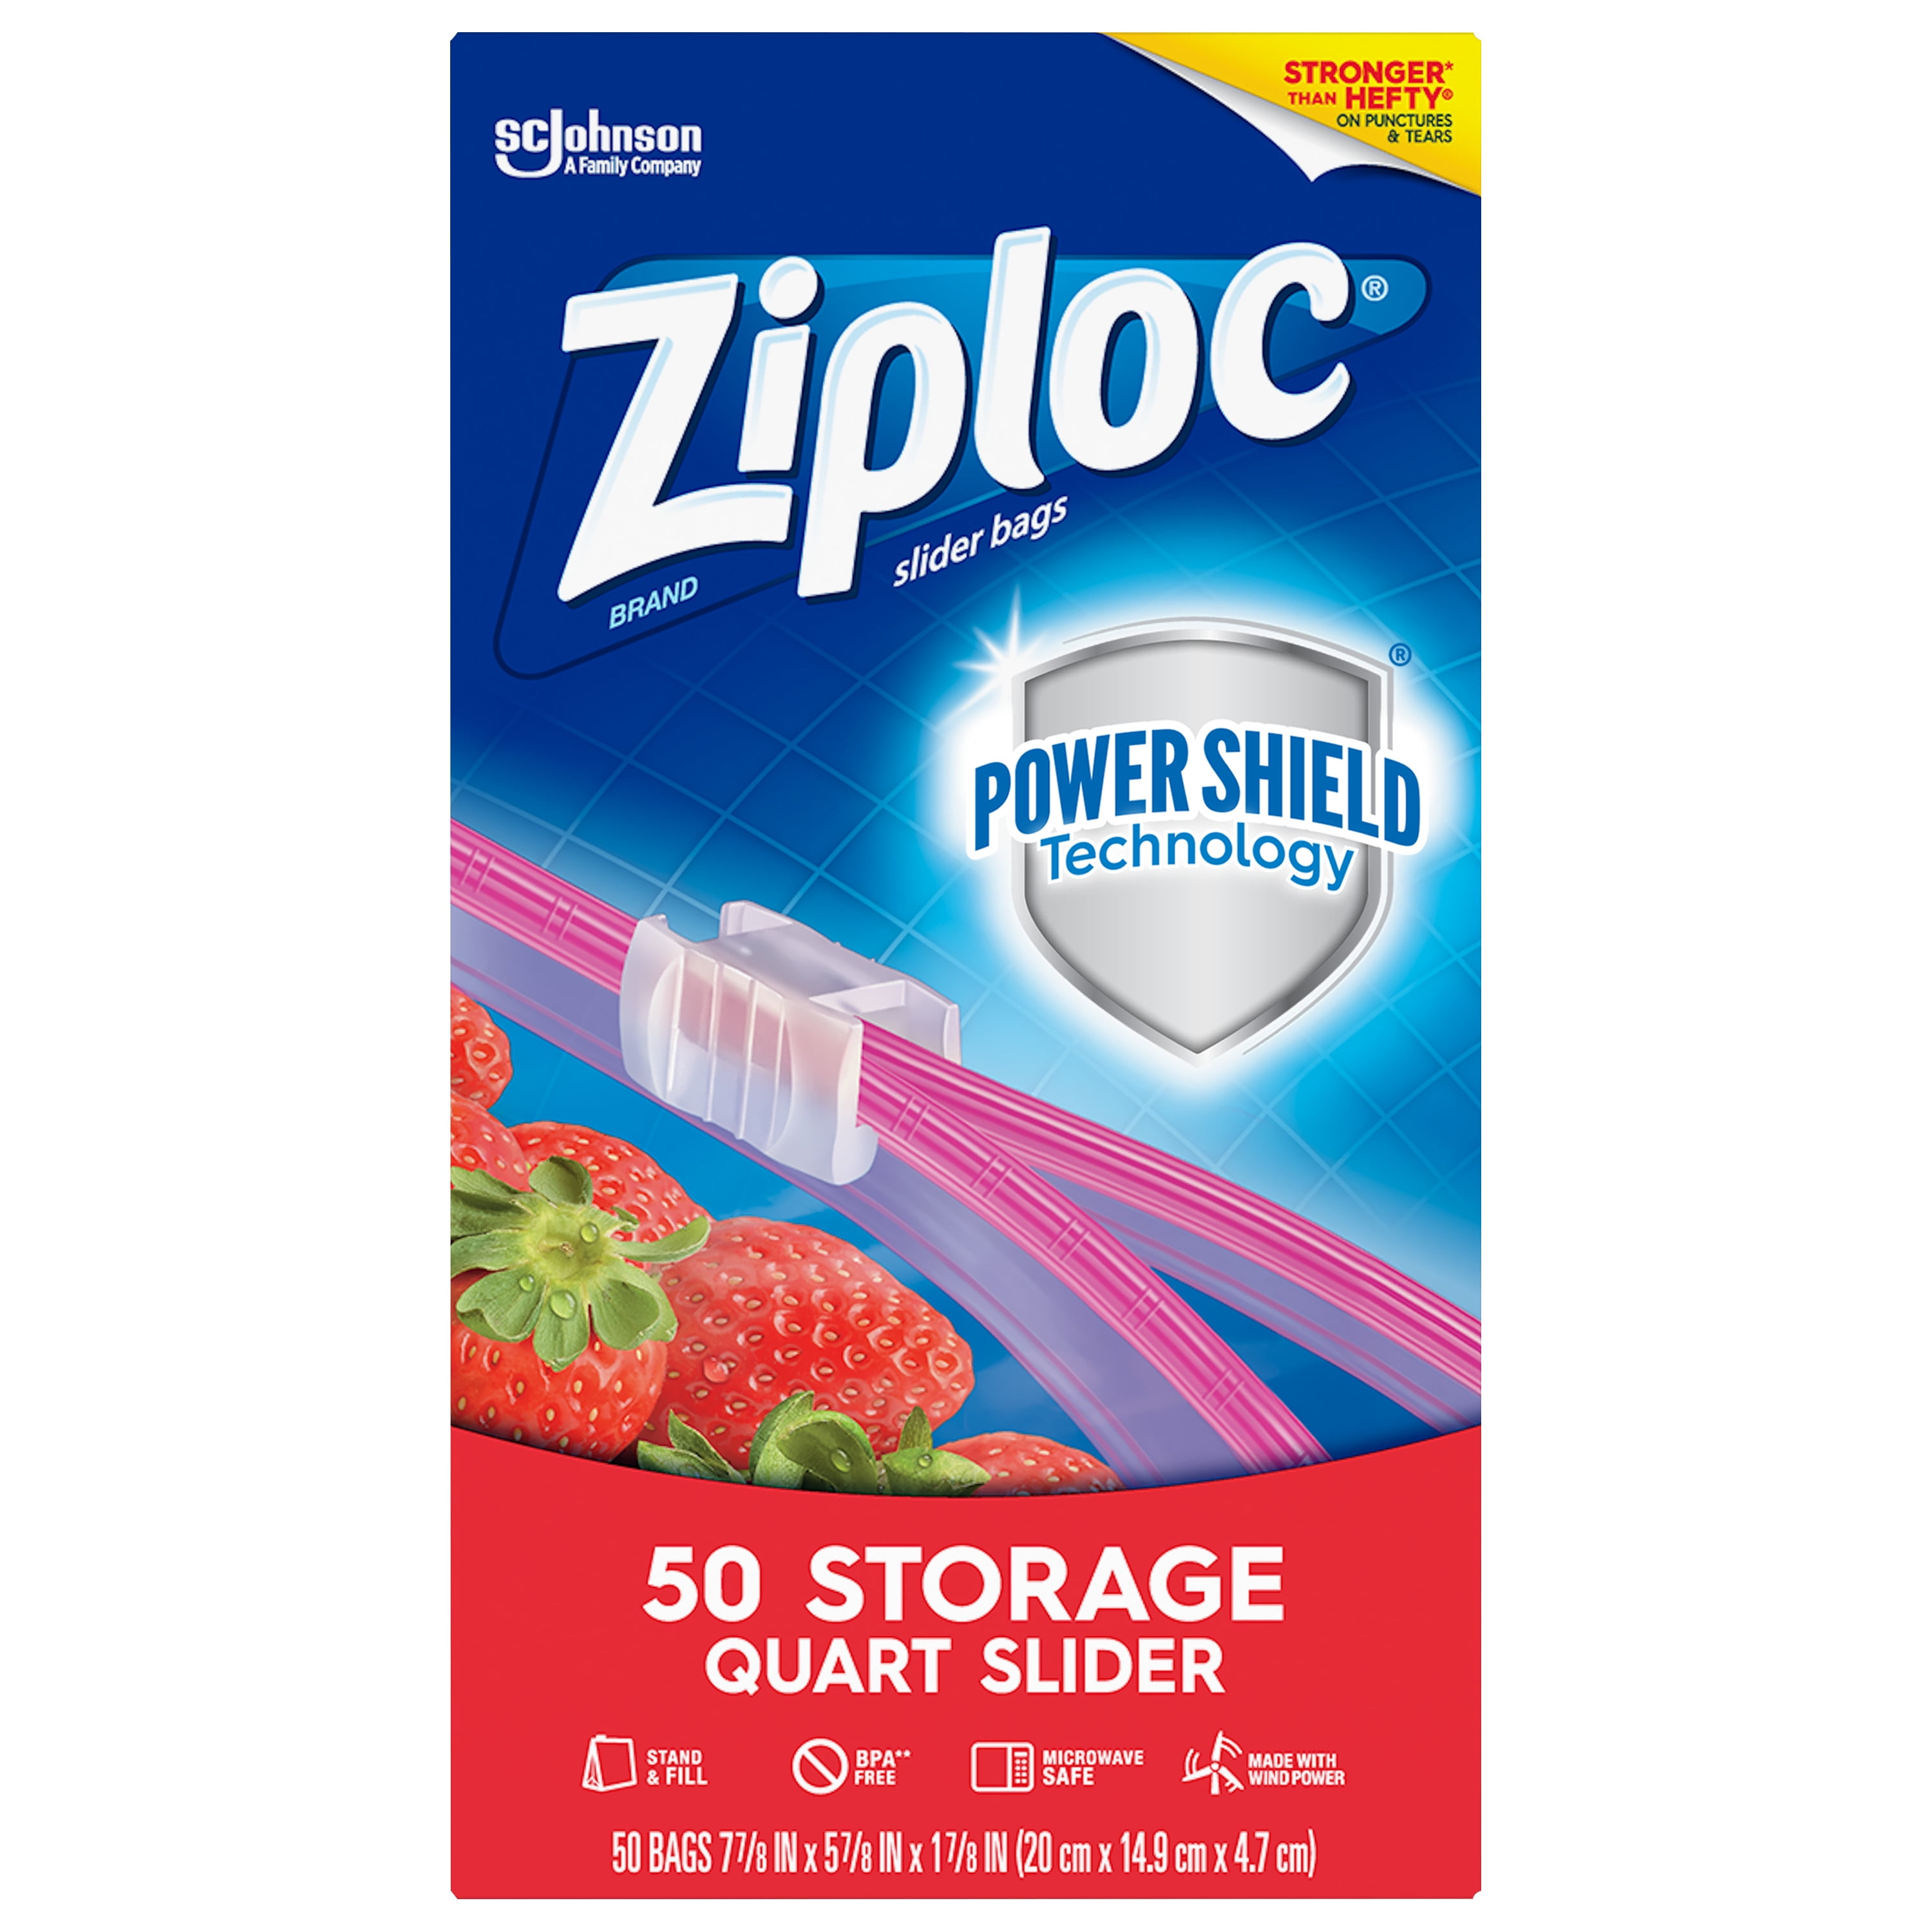 Ziploc Quart Food Storage Freezer Slider Bags, Power Shield Technology for  More Durability, 34 Count (Pack of 4)